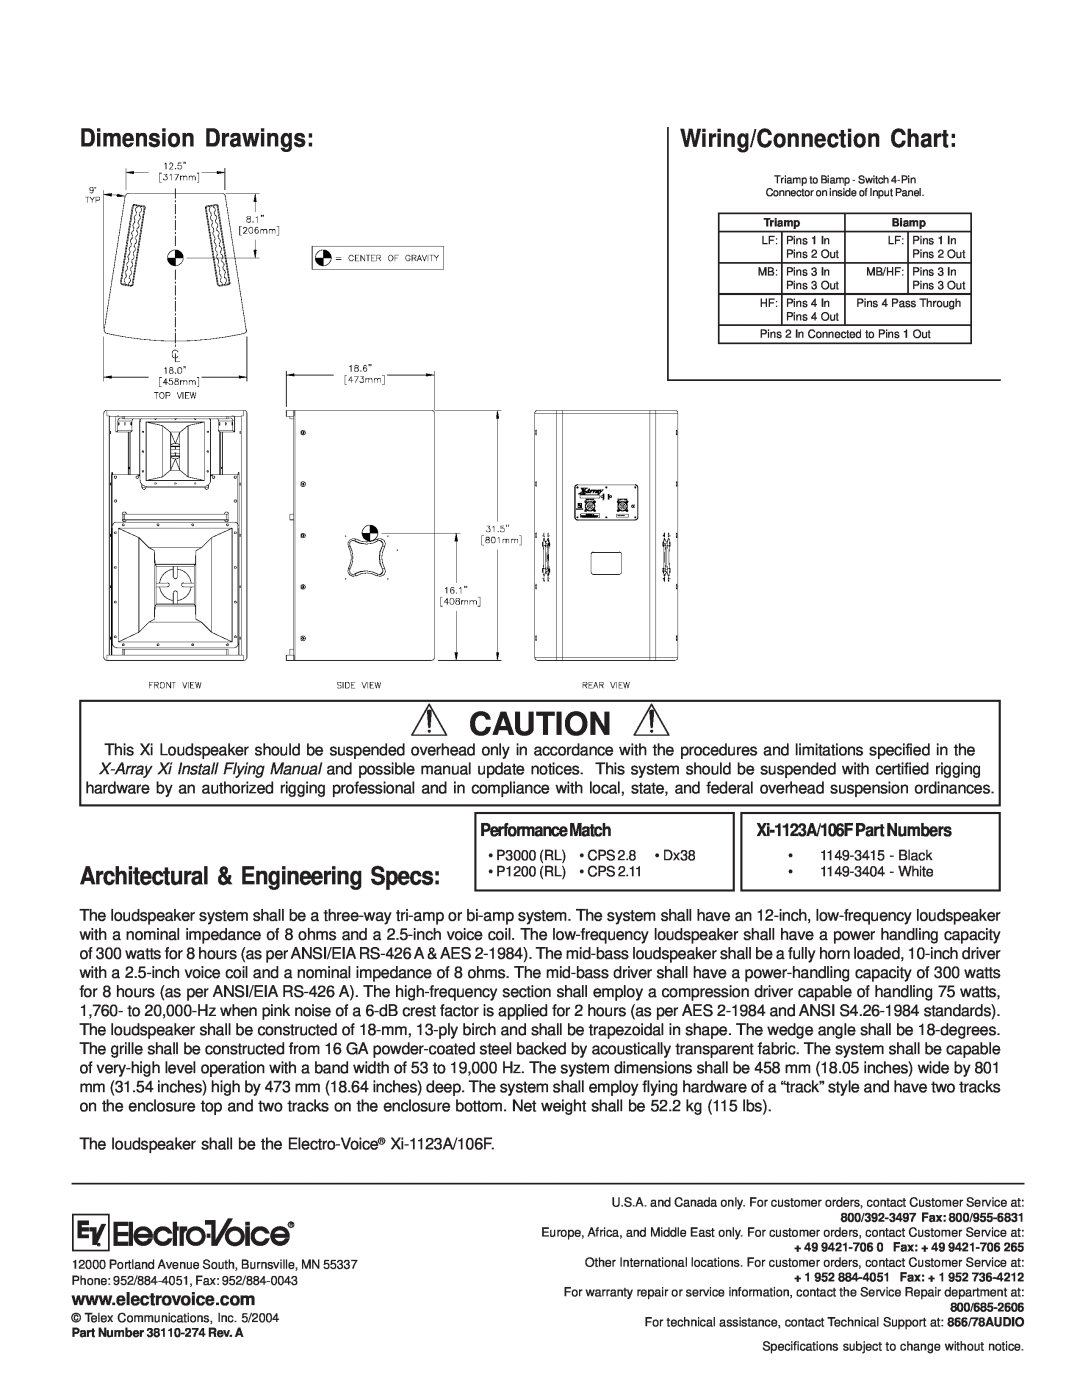 Electro-Voice Xi-1123A/106F Dimension Drawings, Wiring/Connection Chart, Architectural & Engineering Specs 